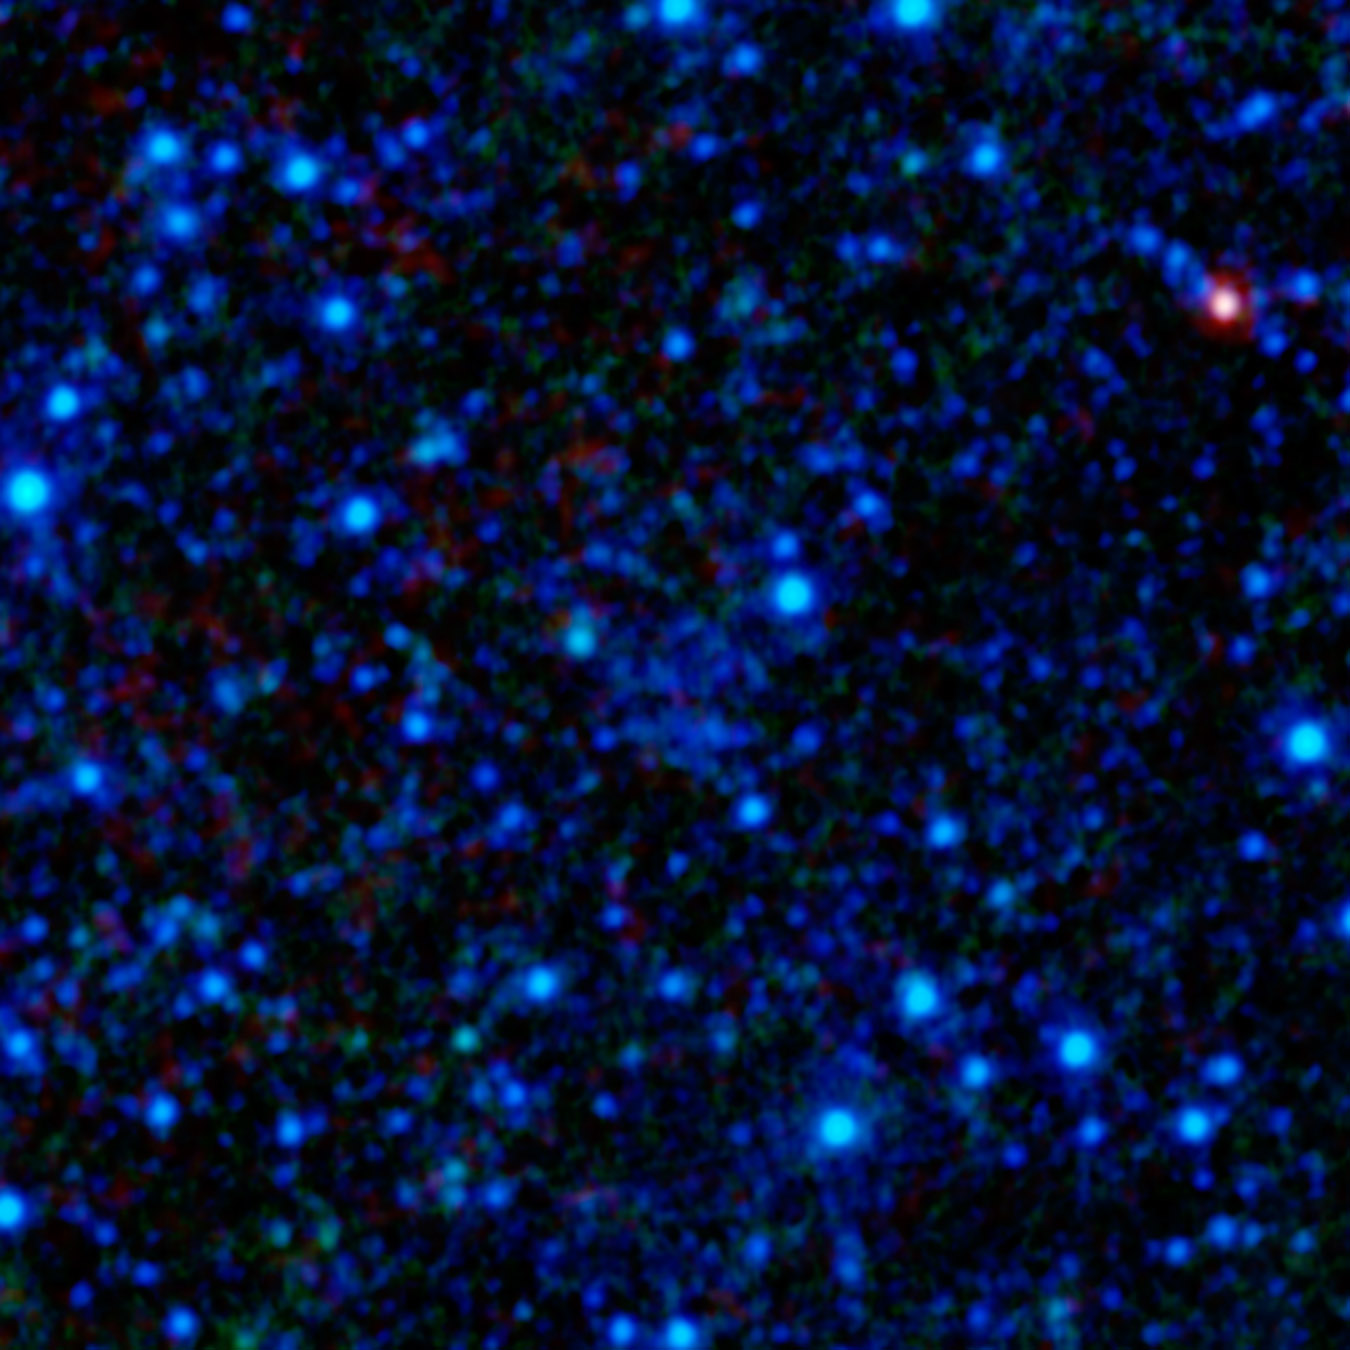 starfield with blue and some red stars